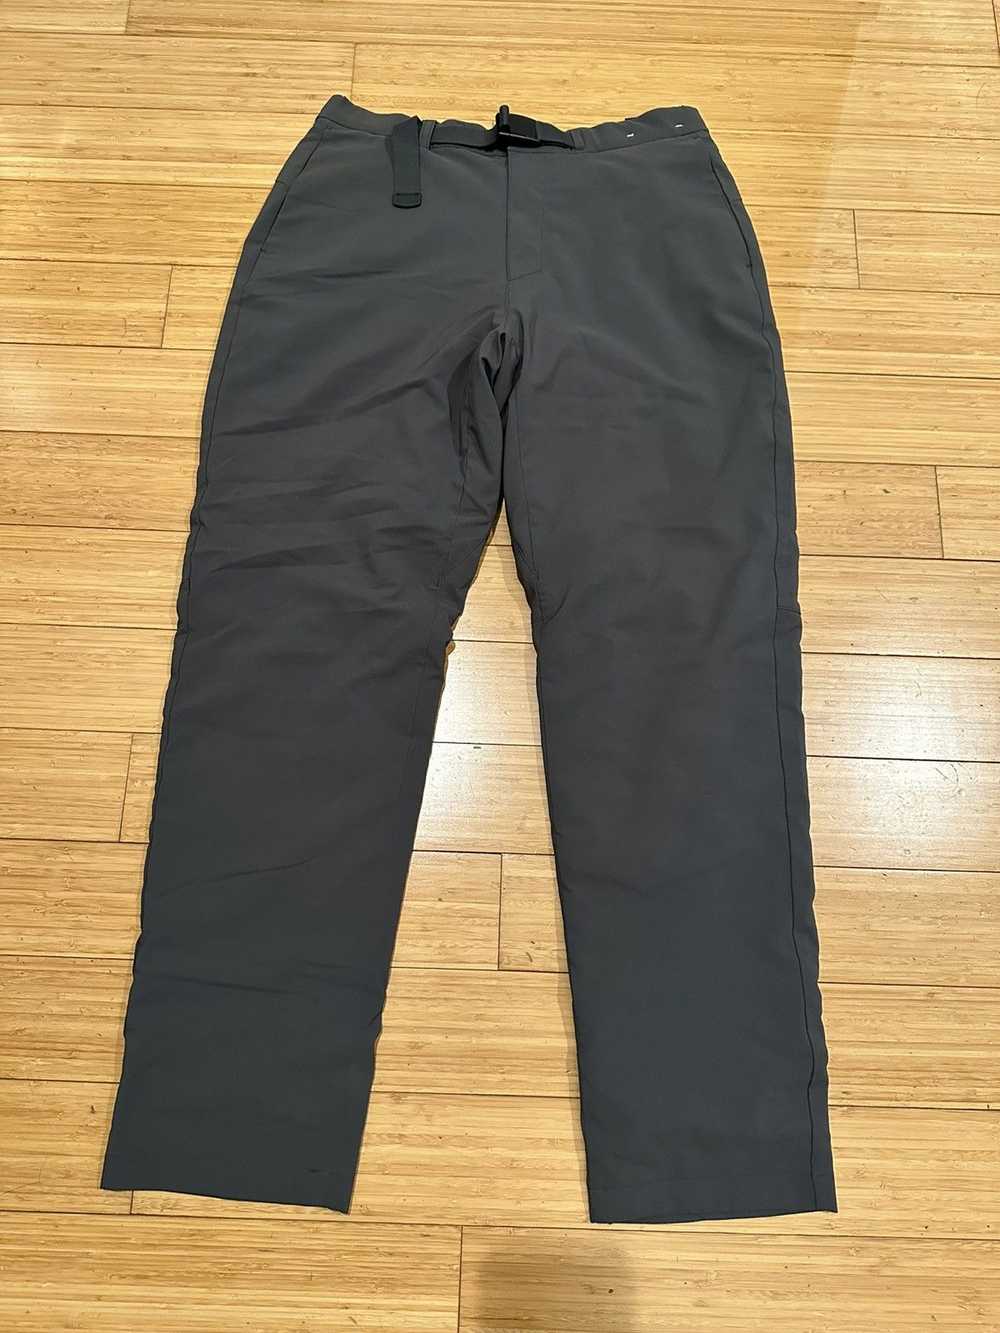 Uniqlo Uniqlo Windproof Extra Warm Lined Pants Gr… - image 1